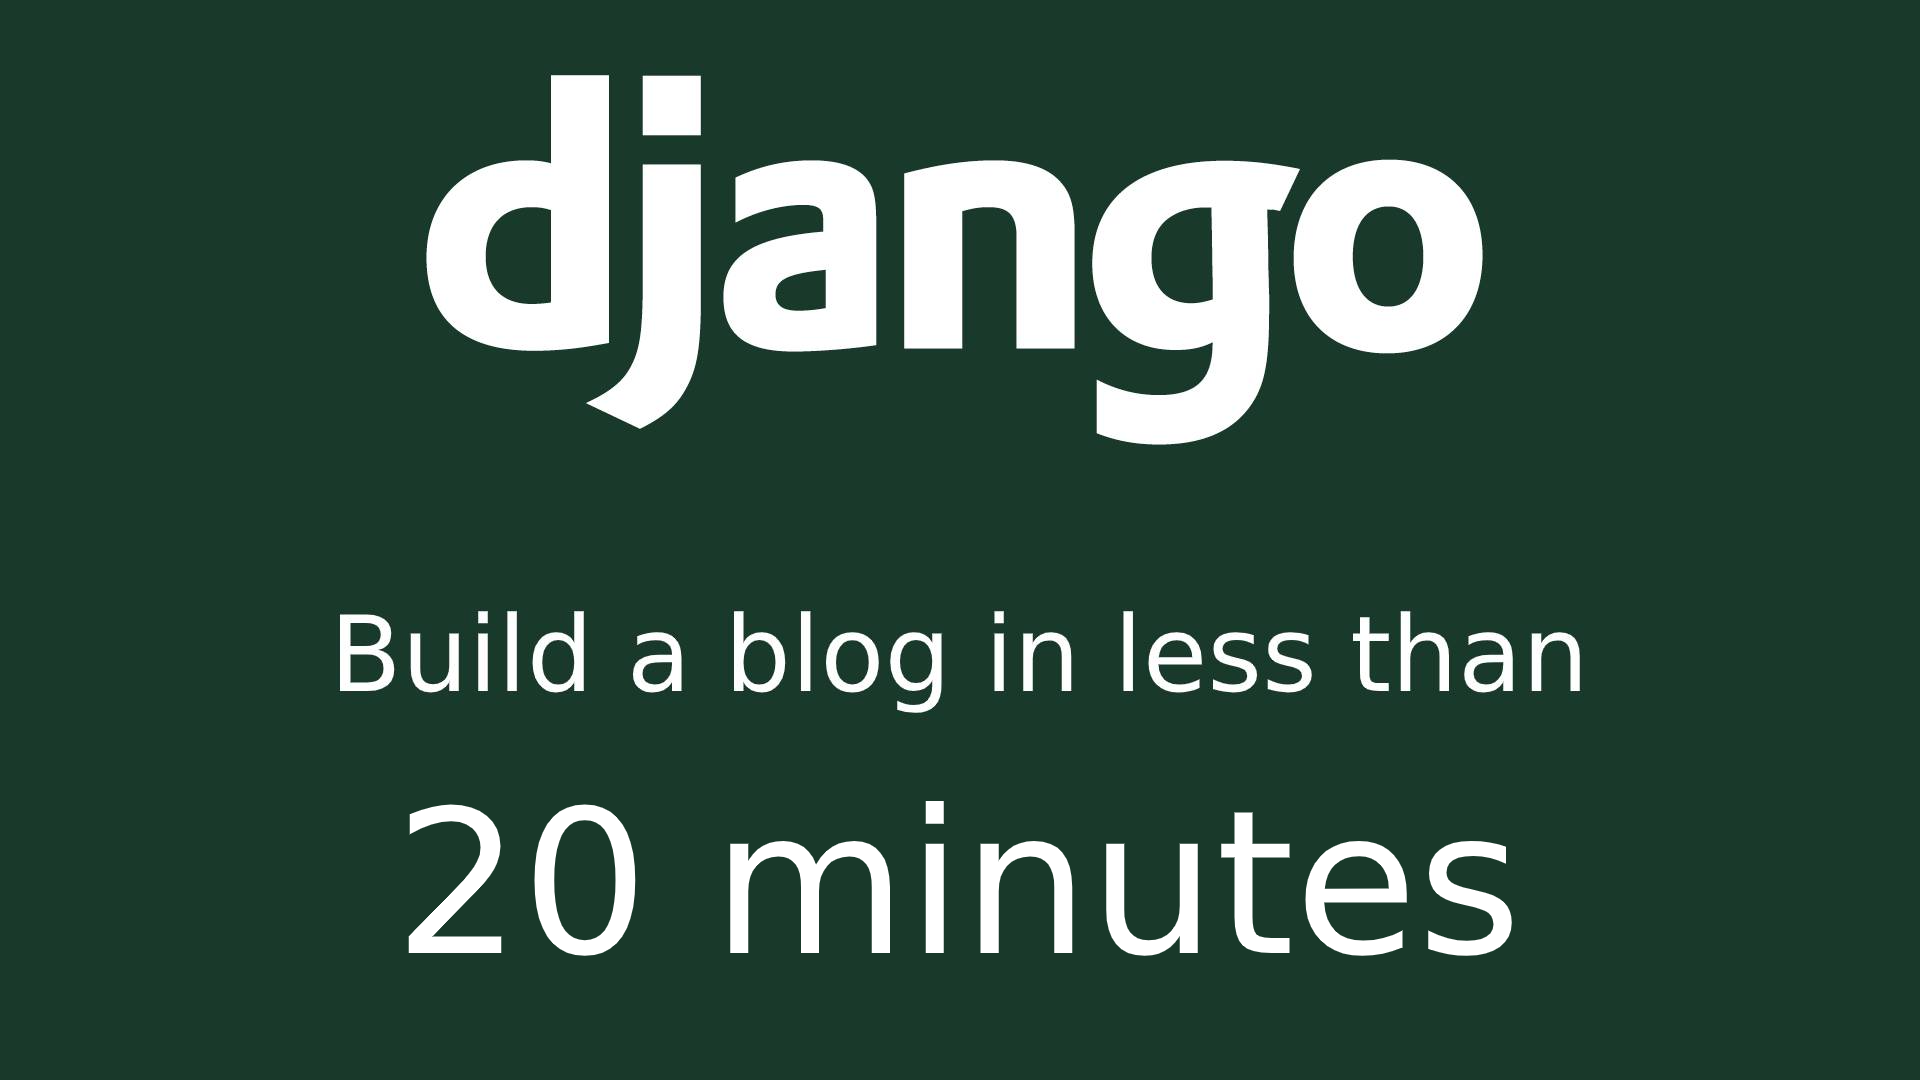 Build a simple blog using Django 3 in under 20 minutes